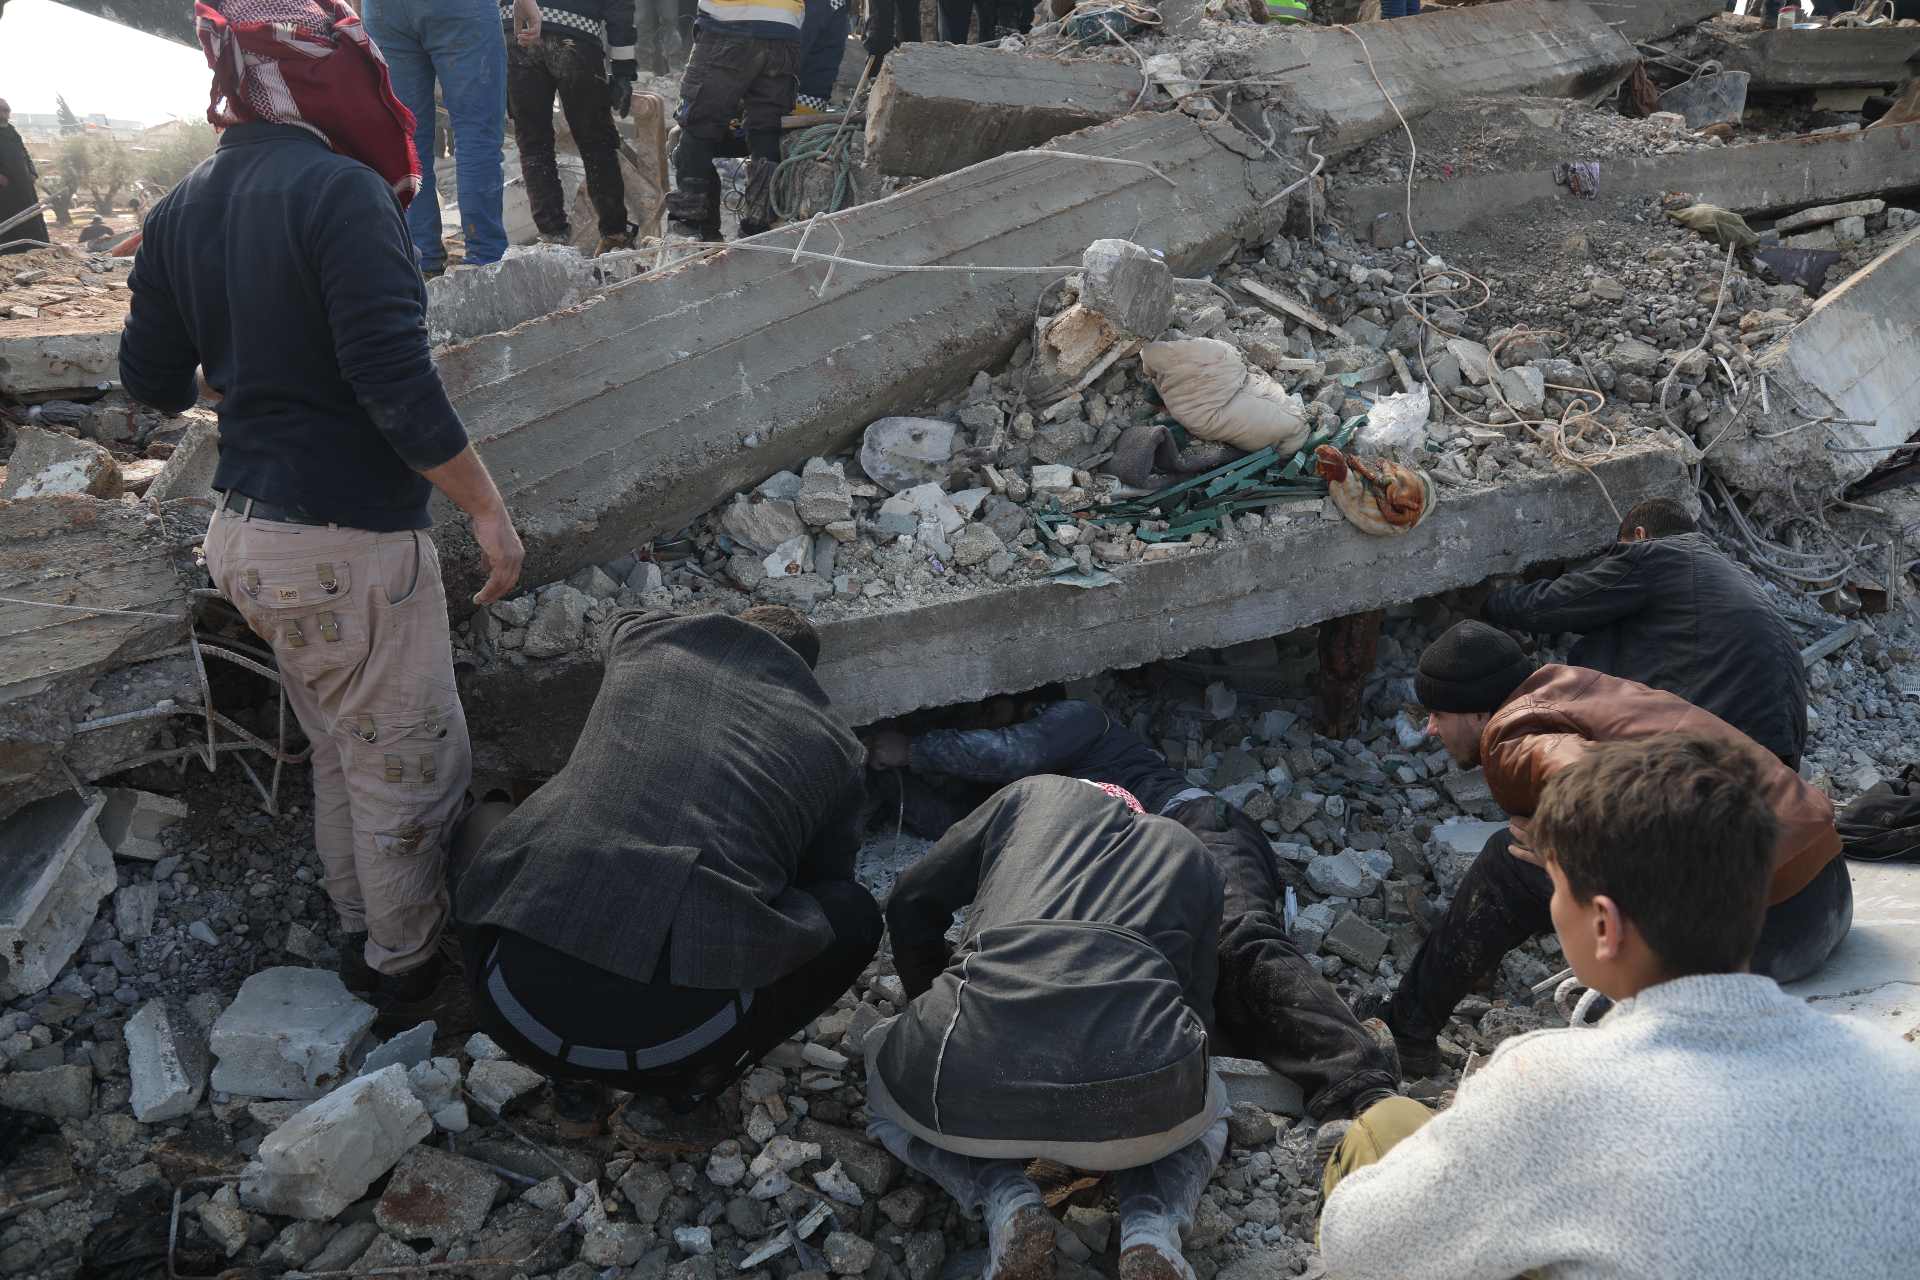 People search through rubble for survivors in Jindires on 7 February, one day after the earthquake (Ali Haj Suleiman/MEE)